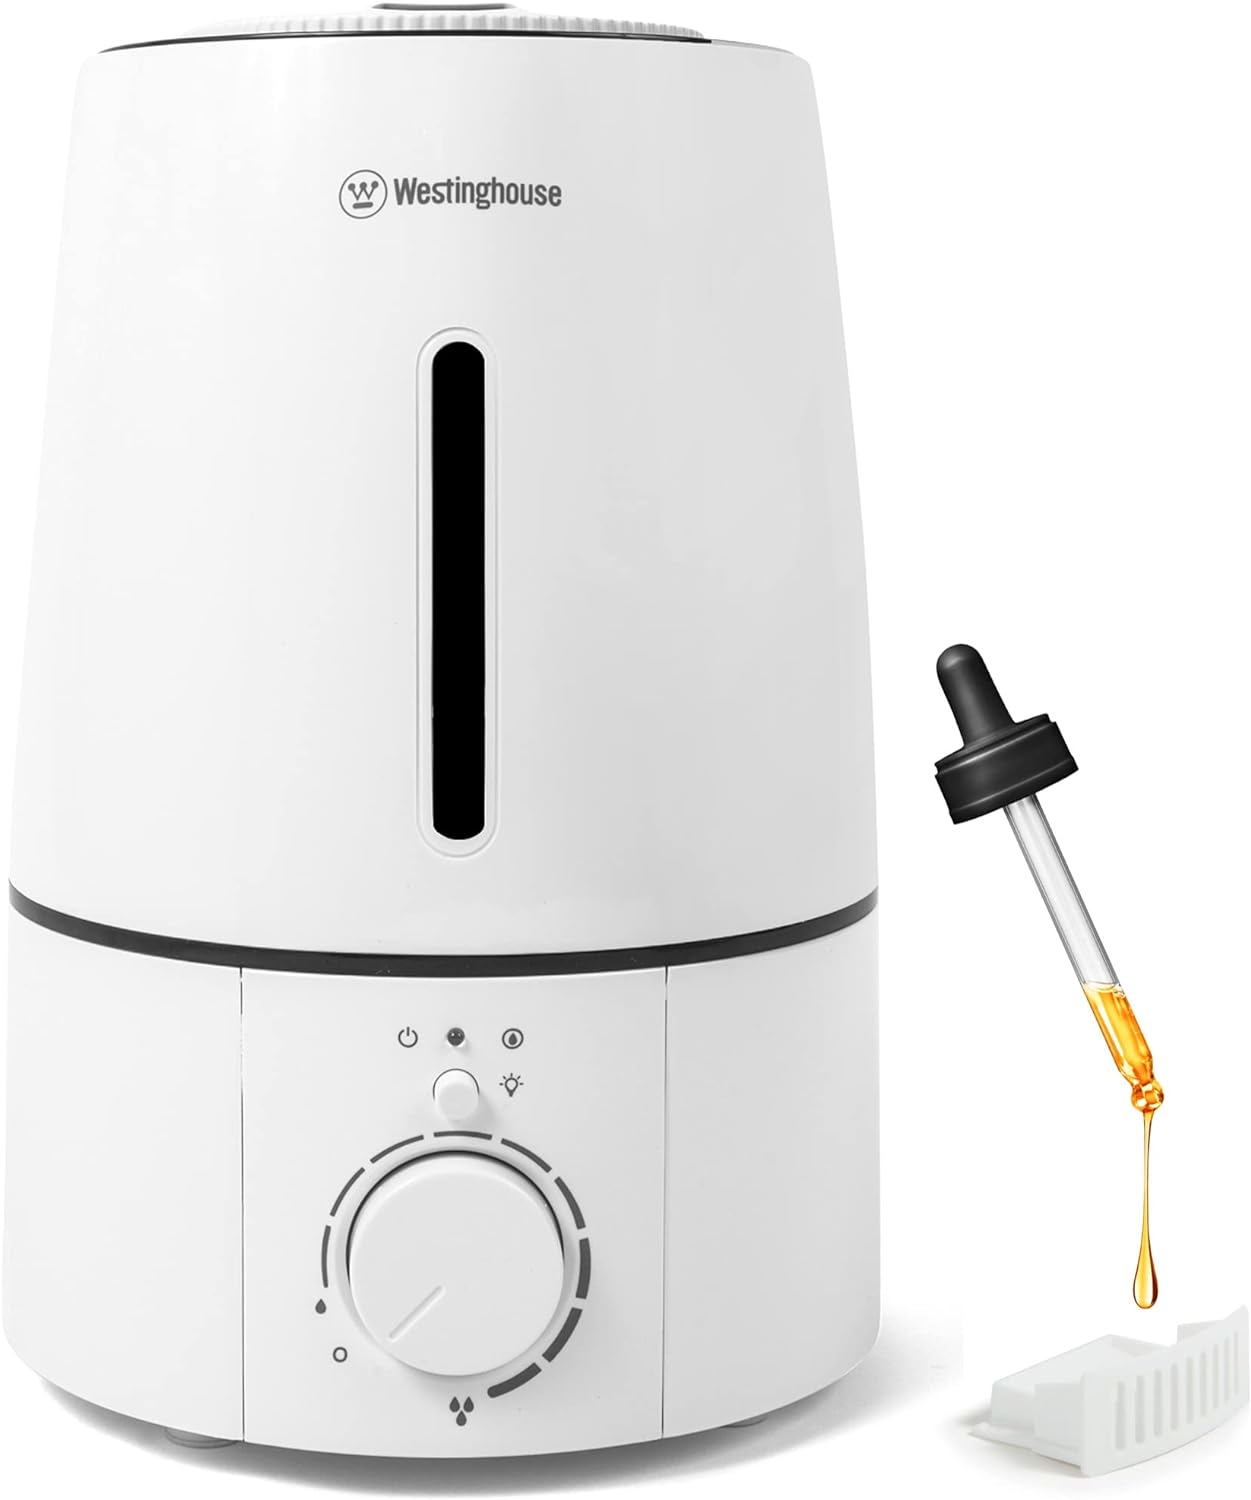 Westinghouse Cool Mist Ultrasonic Humidifier for Bedrooms, 3 Liter Capacity with LED Night Light and Low Water Alarm, Humidifier with Essential Oil Diffuser